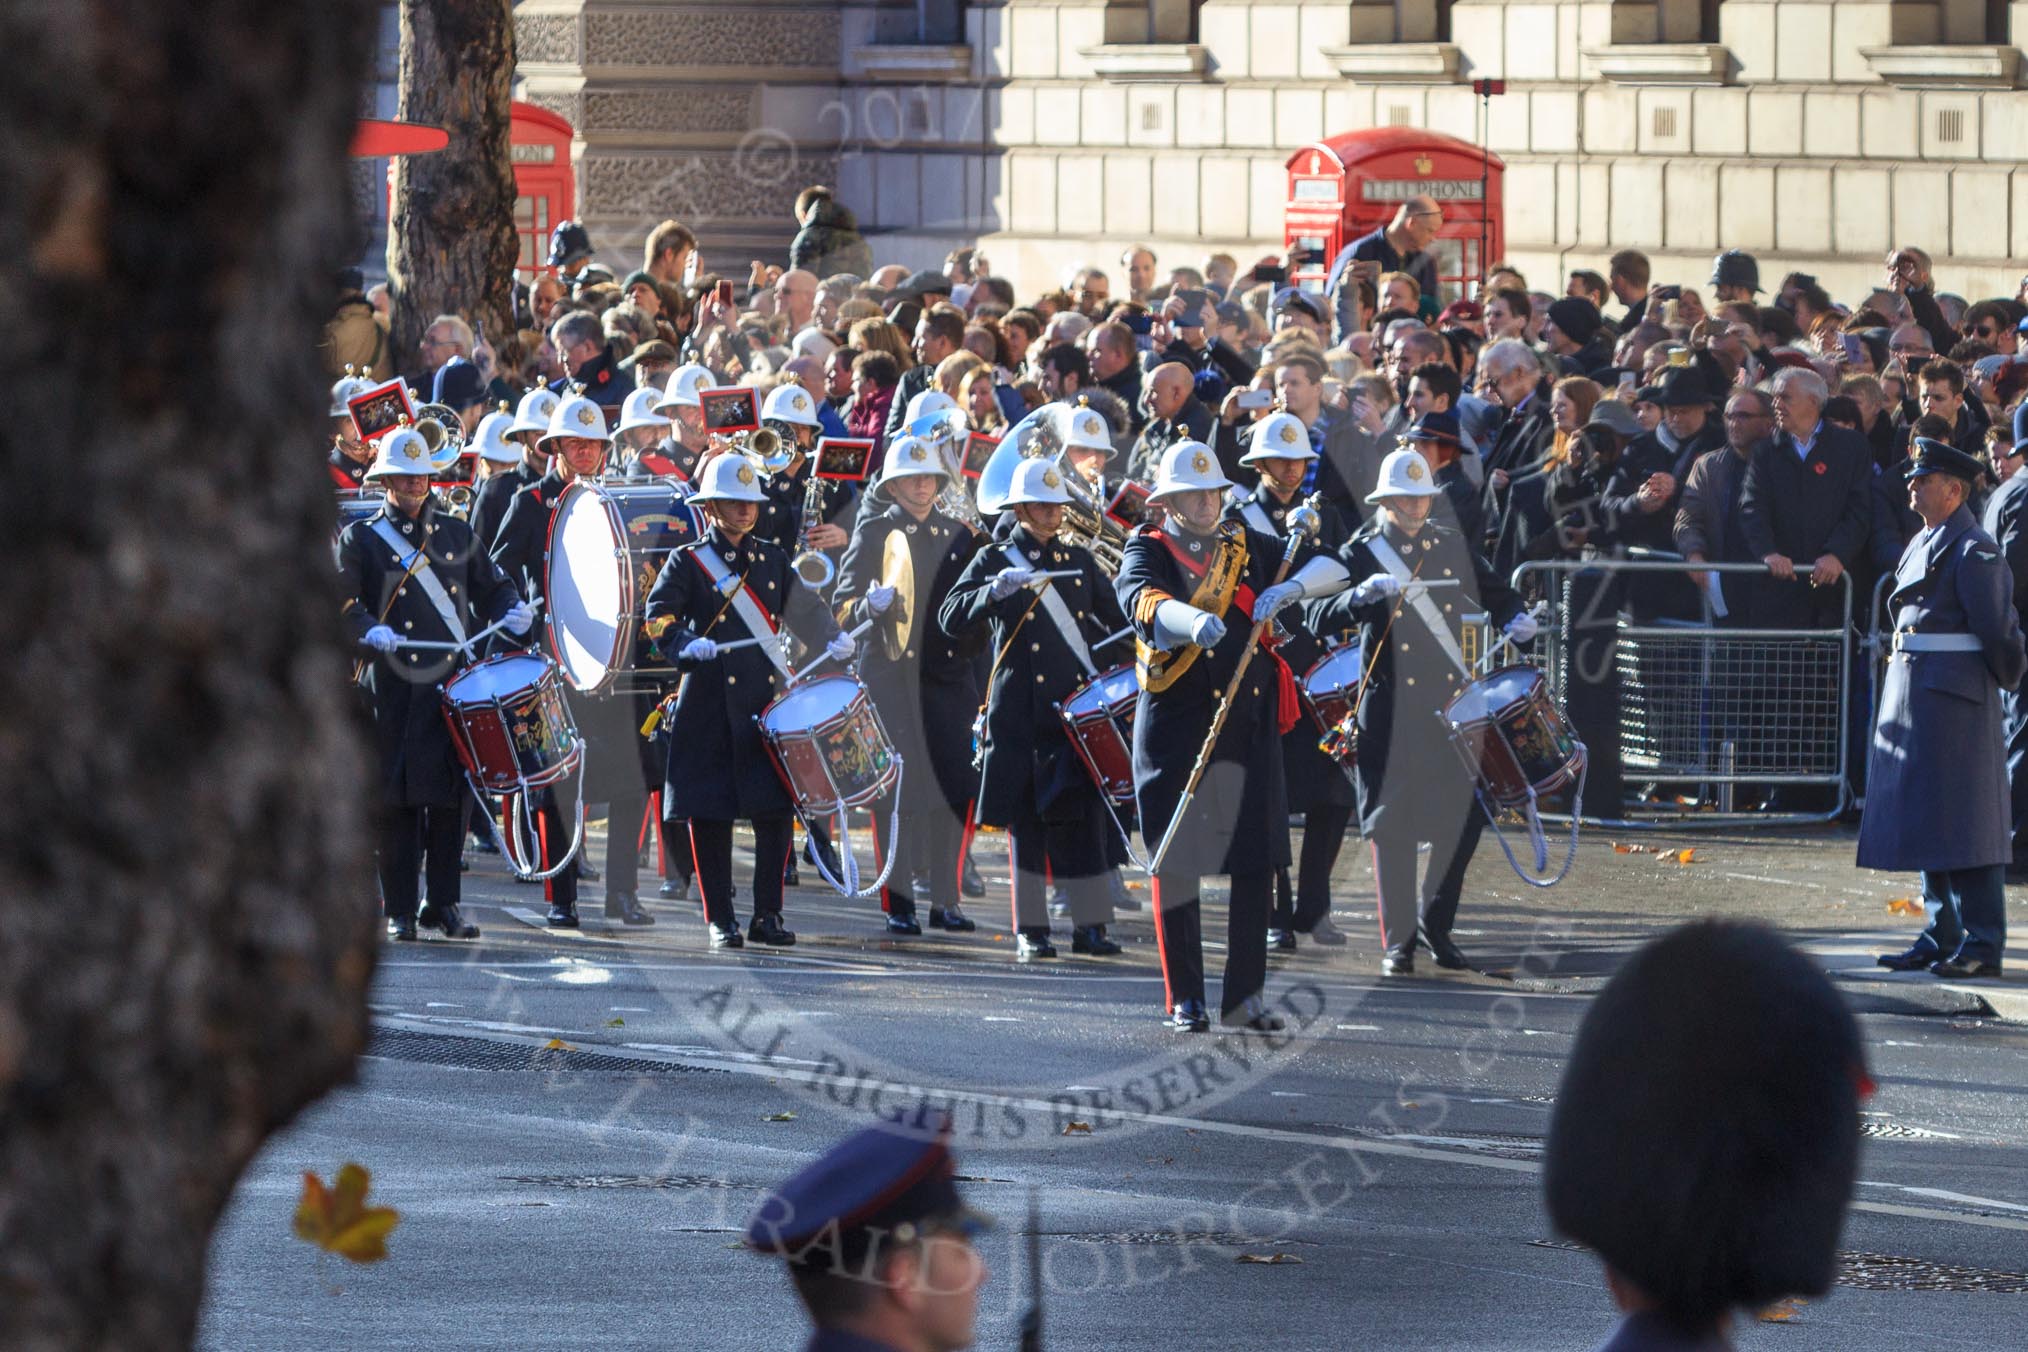 The Band of the Royal Marines arrives on Whitehall before the Remembrance Sunday Cenotaph Ceremony 2018 at Horse Guards Parade, Westminster, London, 11 November 2018, 10:17.